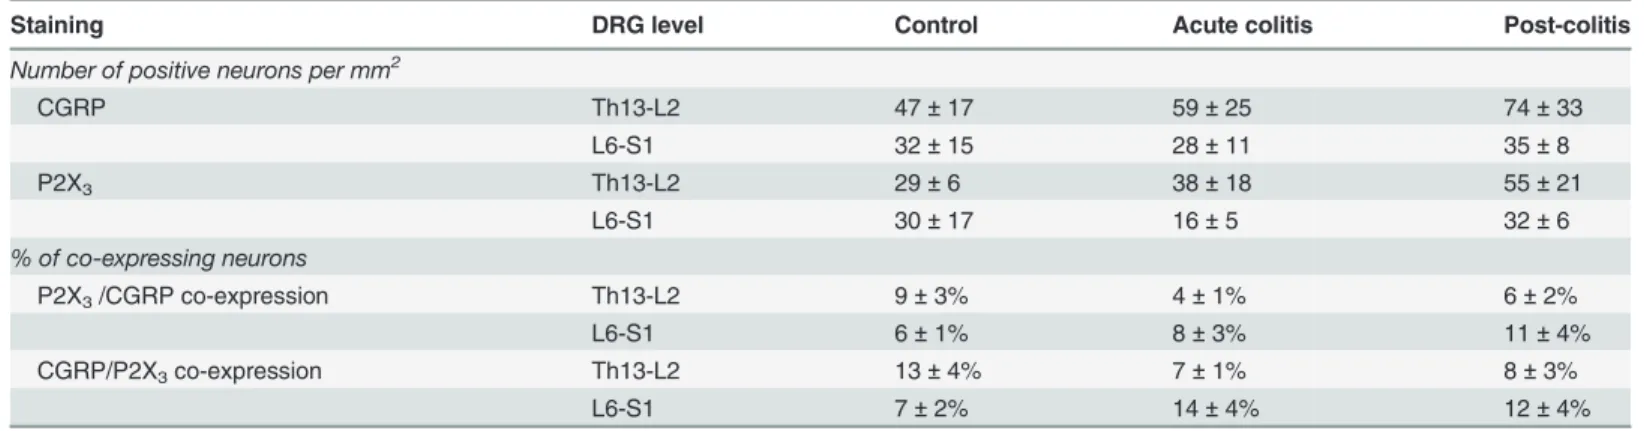 Table 4. Protein expression of CGRP and P2X 3 in the dorsal root ganglia.